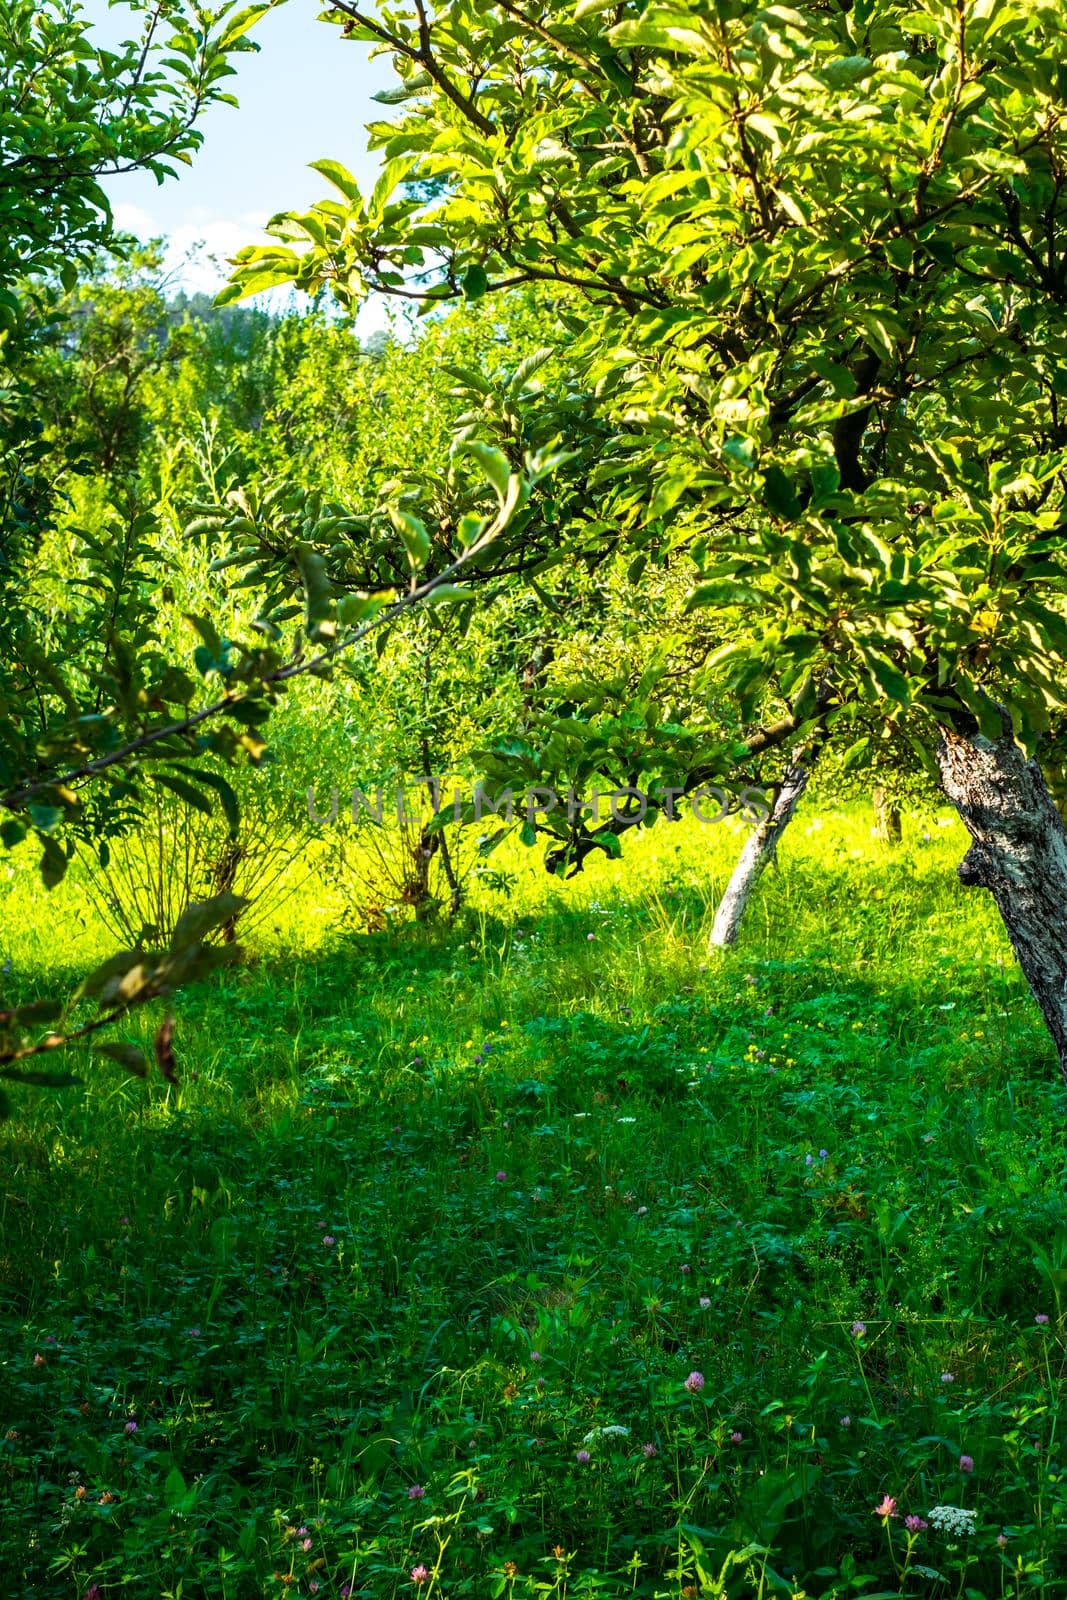 apple orchard in the backyard